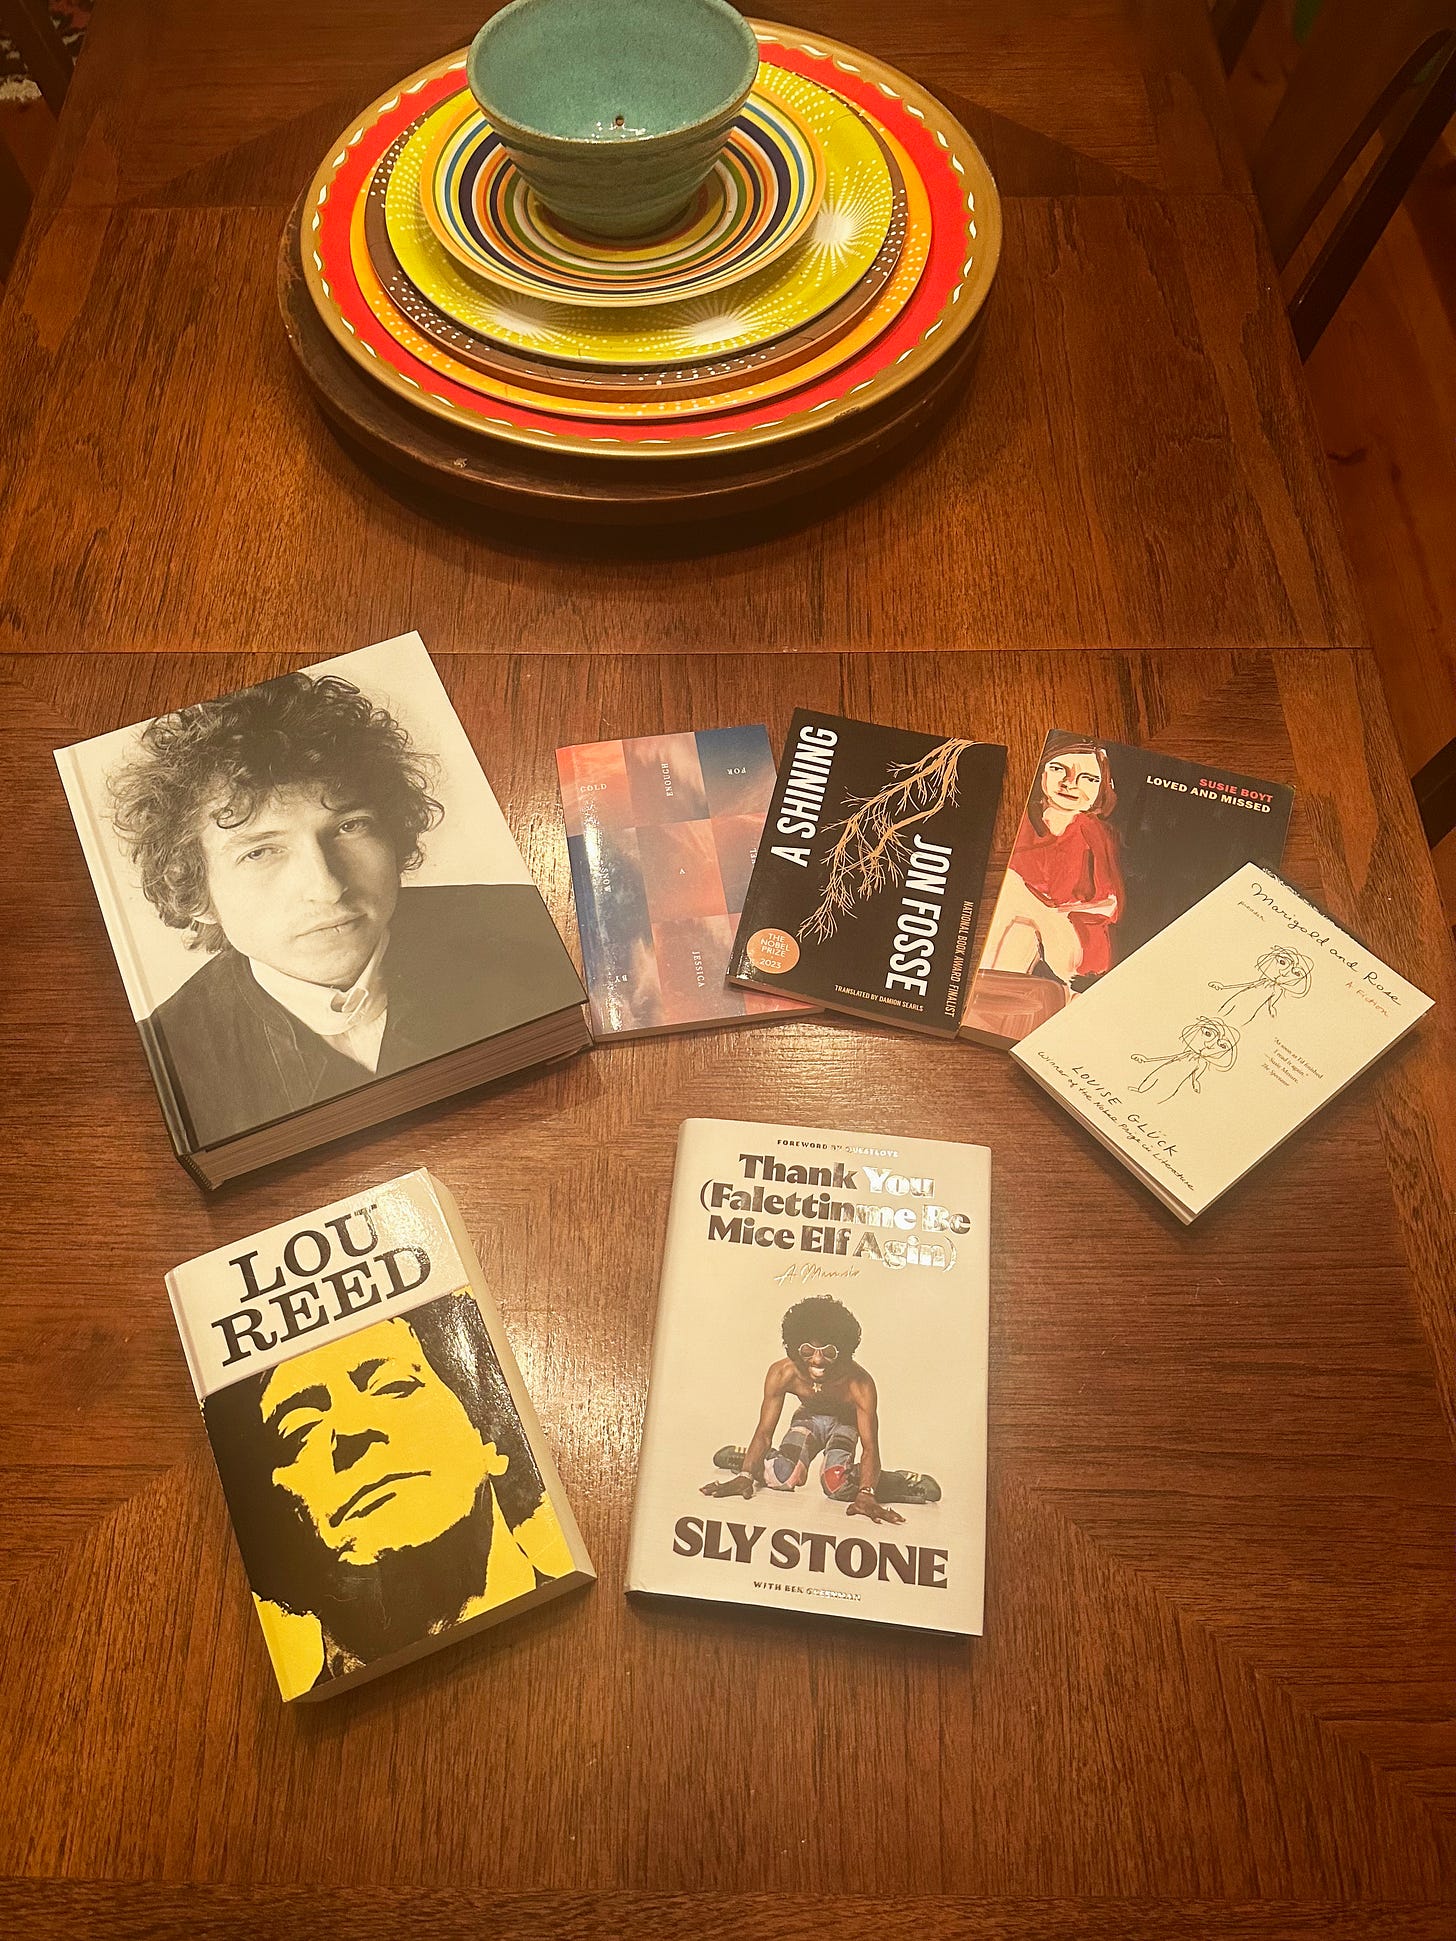 Several books laid out on a wooden table, with a colorful lazy Susan in the background.